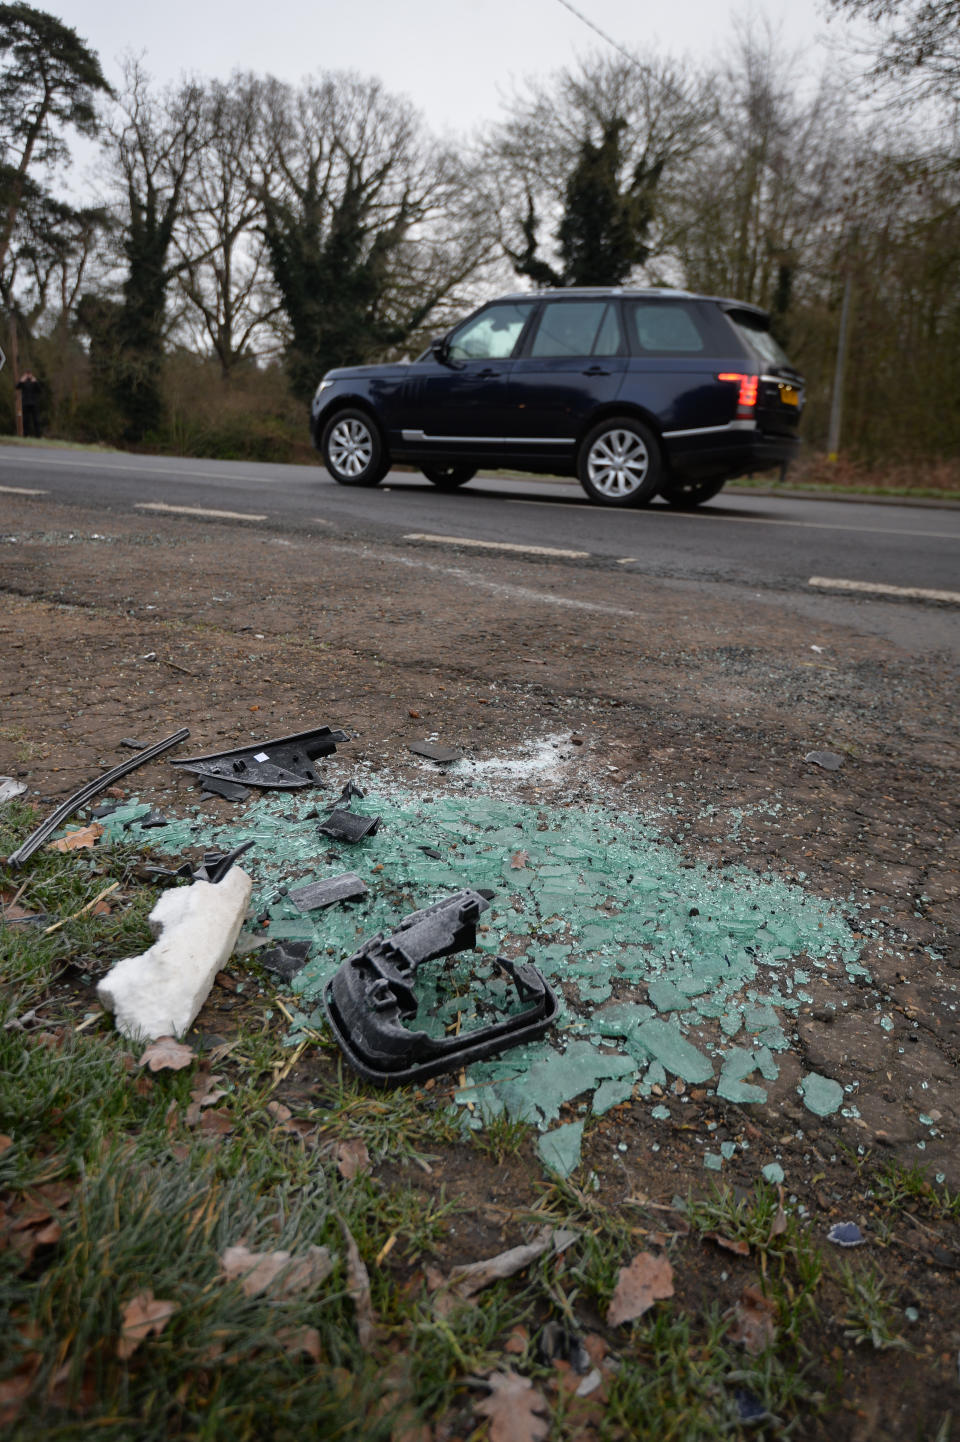 Broken glass and car parts on the side of the A149 near to the Sandringham Estate where the Duke of Edinburgh was involved in a road accident yesterday while driving.